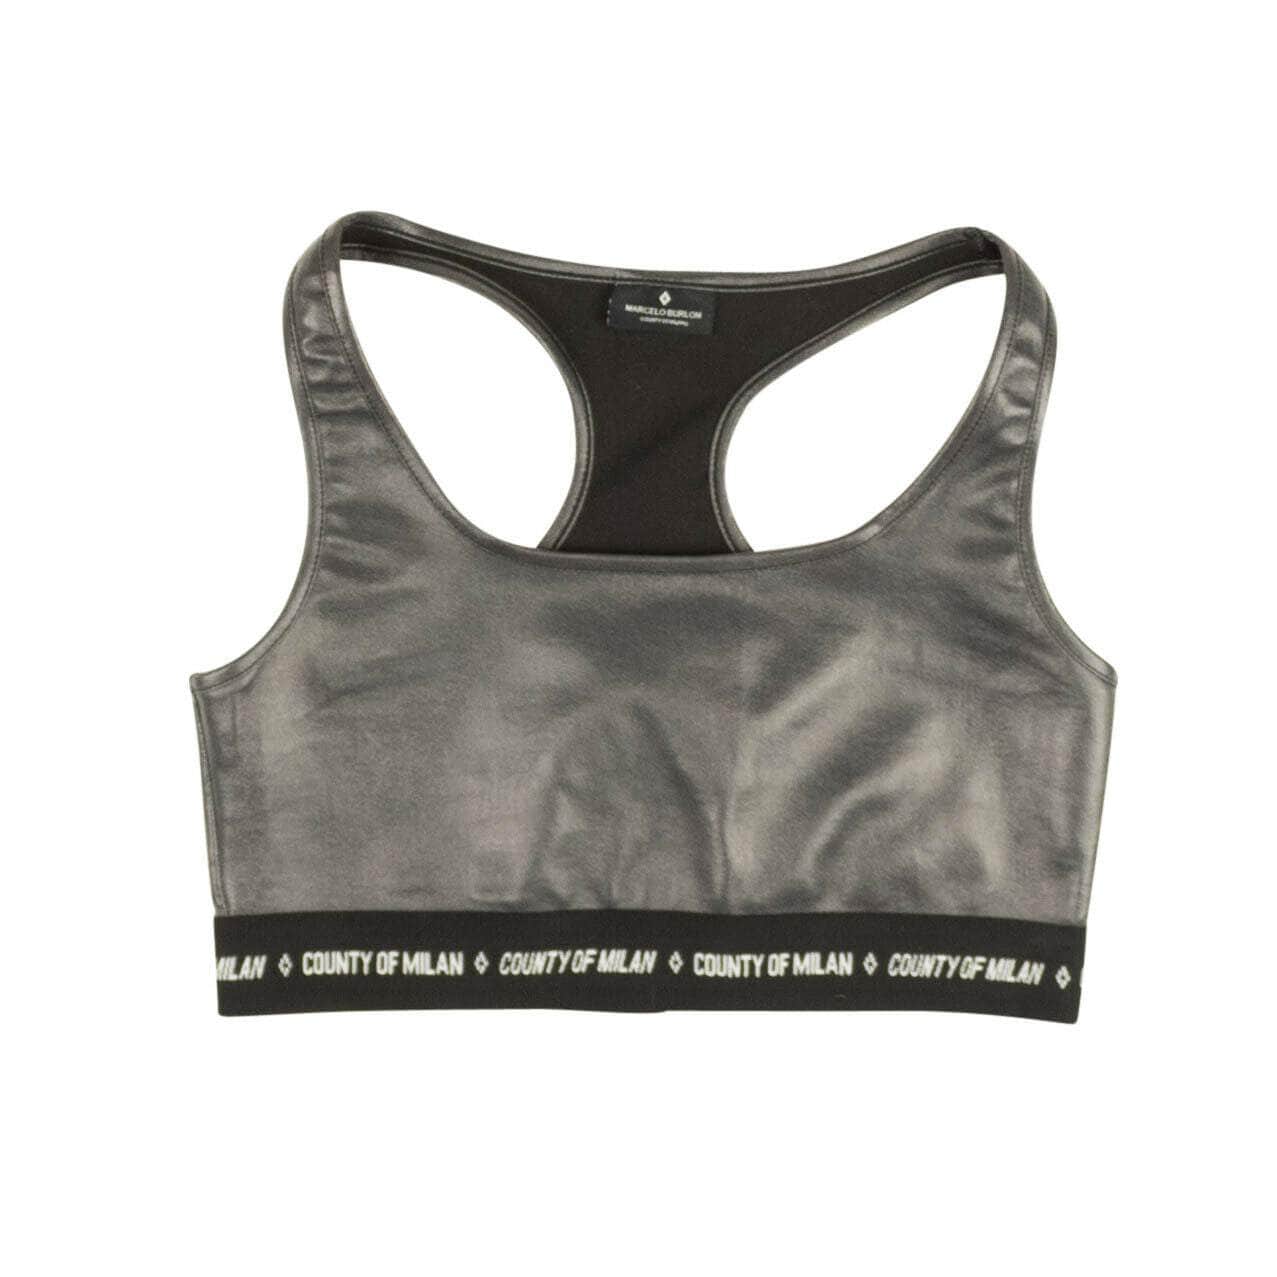 Marcelo Burlon channelenable-all, chicmi, couponcollection, gender-womens, main-clothing, marcelo-burlon, size-s, uncategorized, under-250 S Black Shiny Logo Band Sports Bra 82NGG-MB-1197/S 82NGG-MB-1197/S